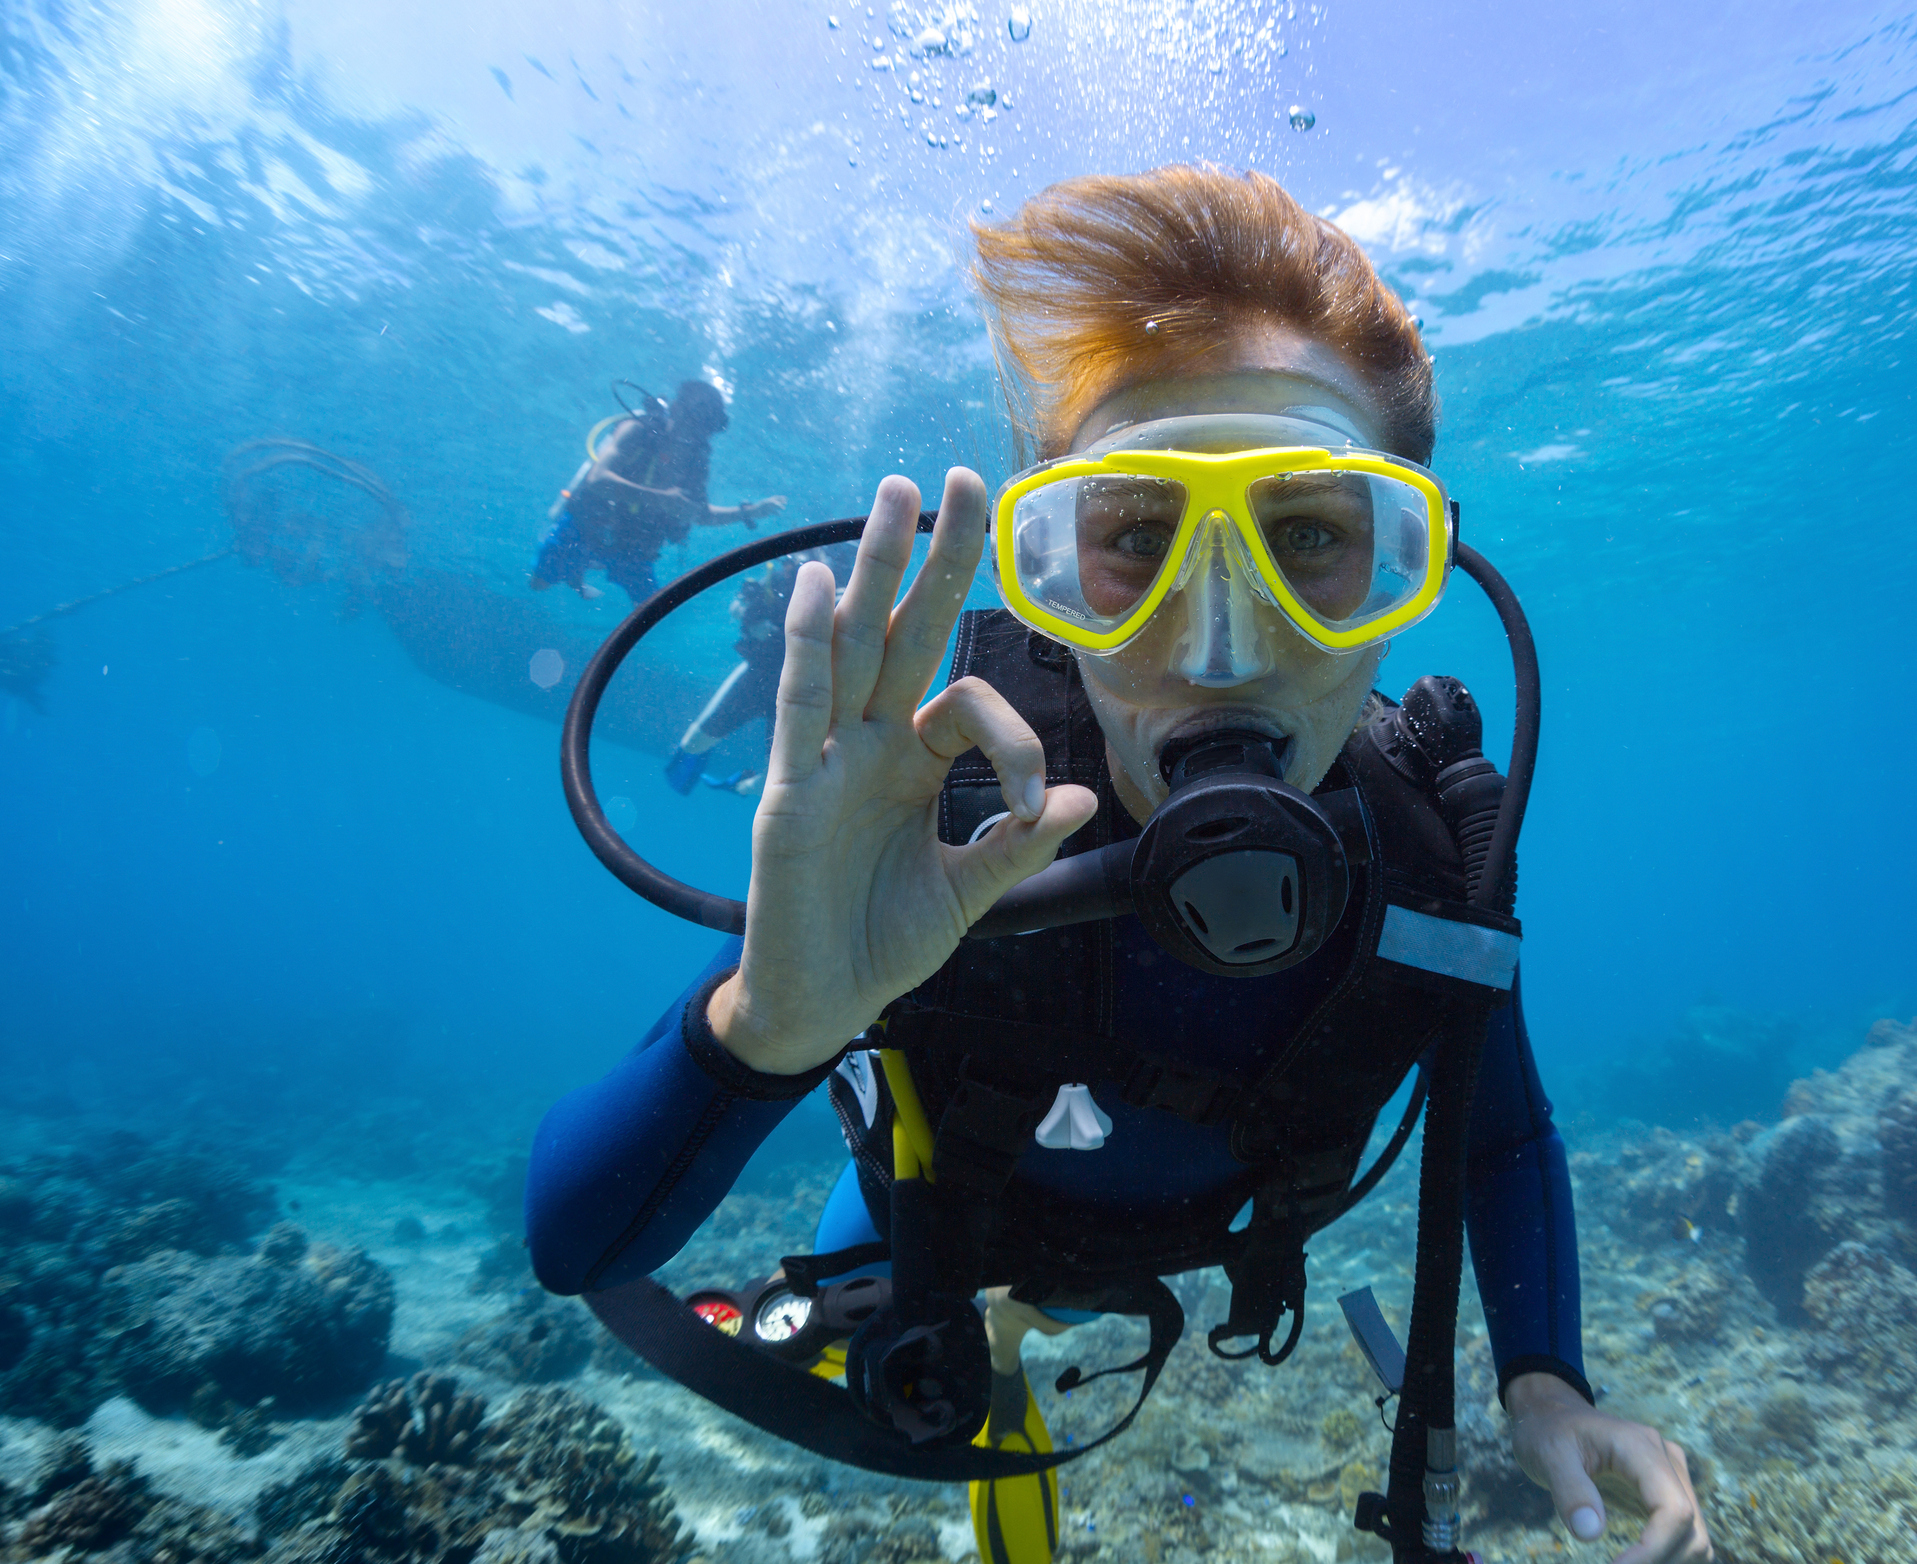 Richmond Community College will be offering a four-day open water scuba diving class beginning March 17. For information, call (910) 410-1848.